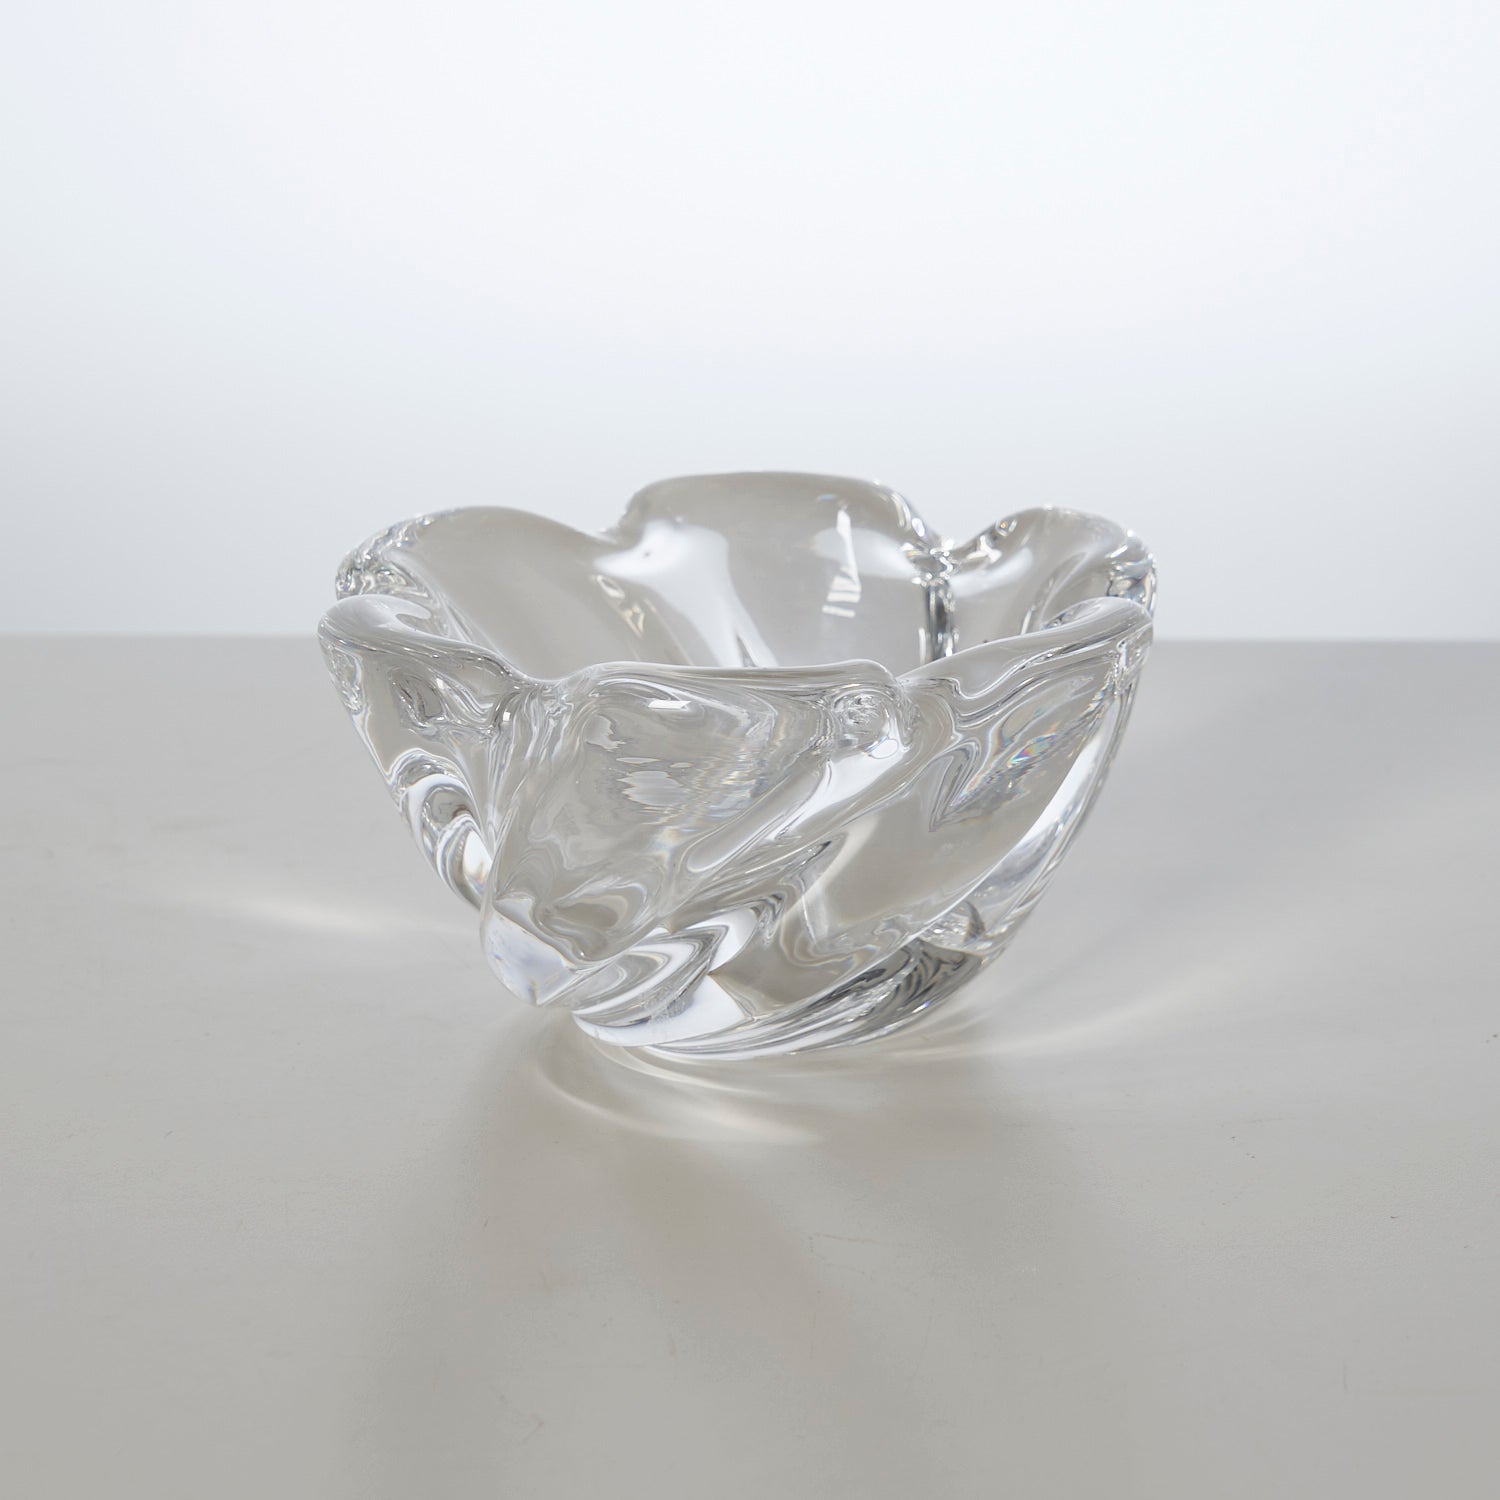 Clear Art Glass Bowl by Orrefors